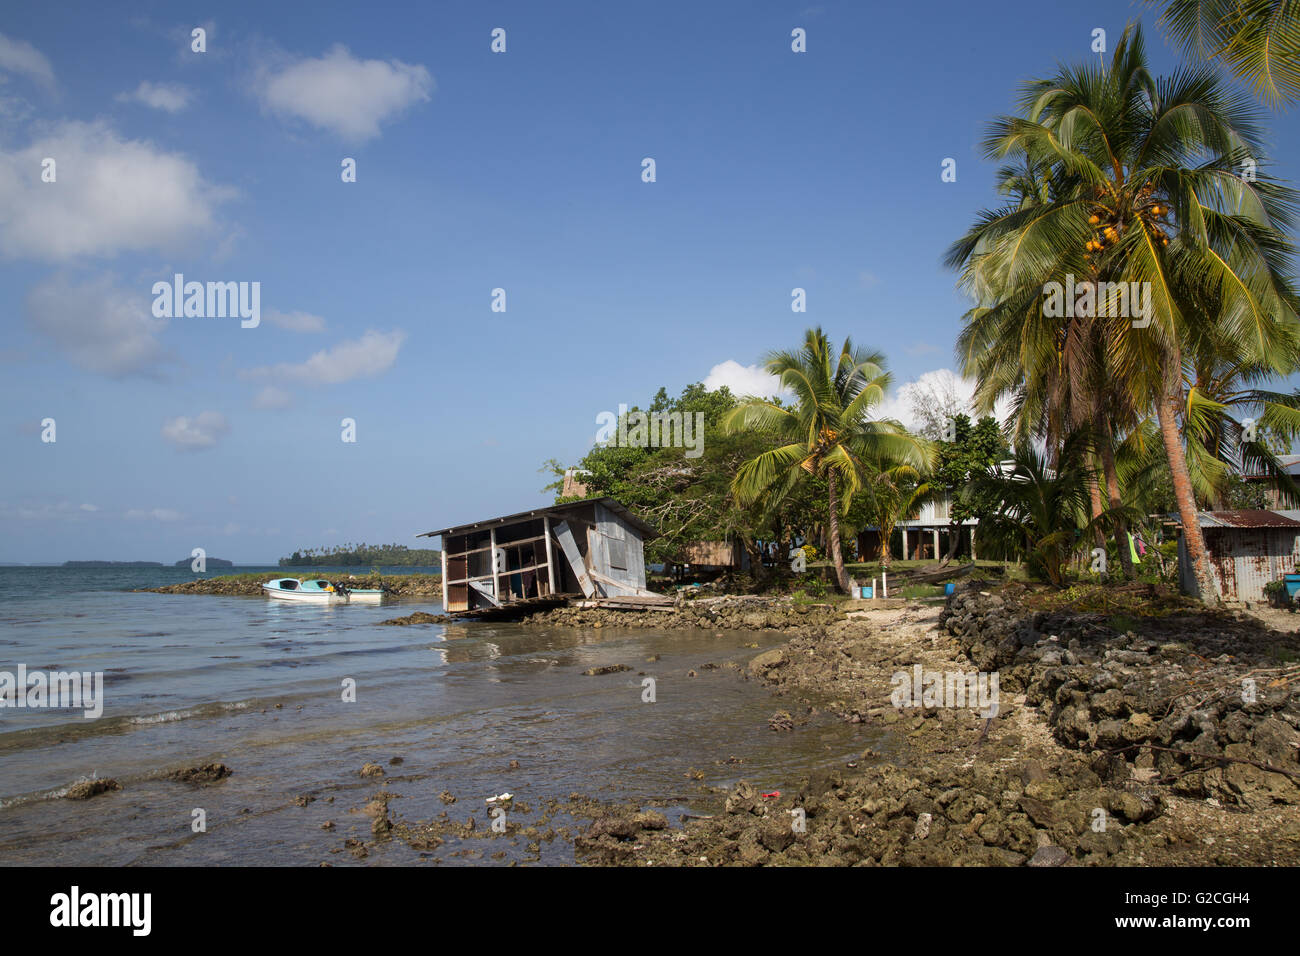 Chea Village, Solomon Islands - May 31, 2015: Destroyed house along the coastline in a village on the Solomon Islands Stock Photo